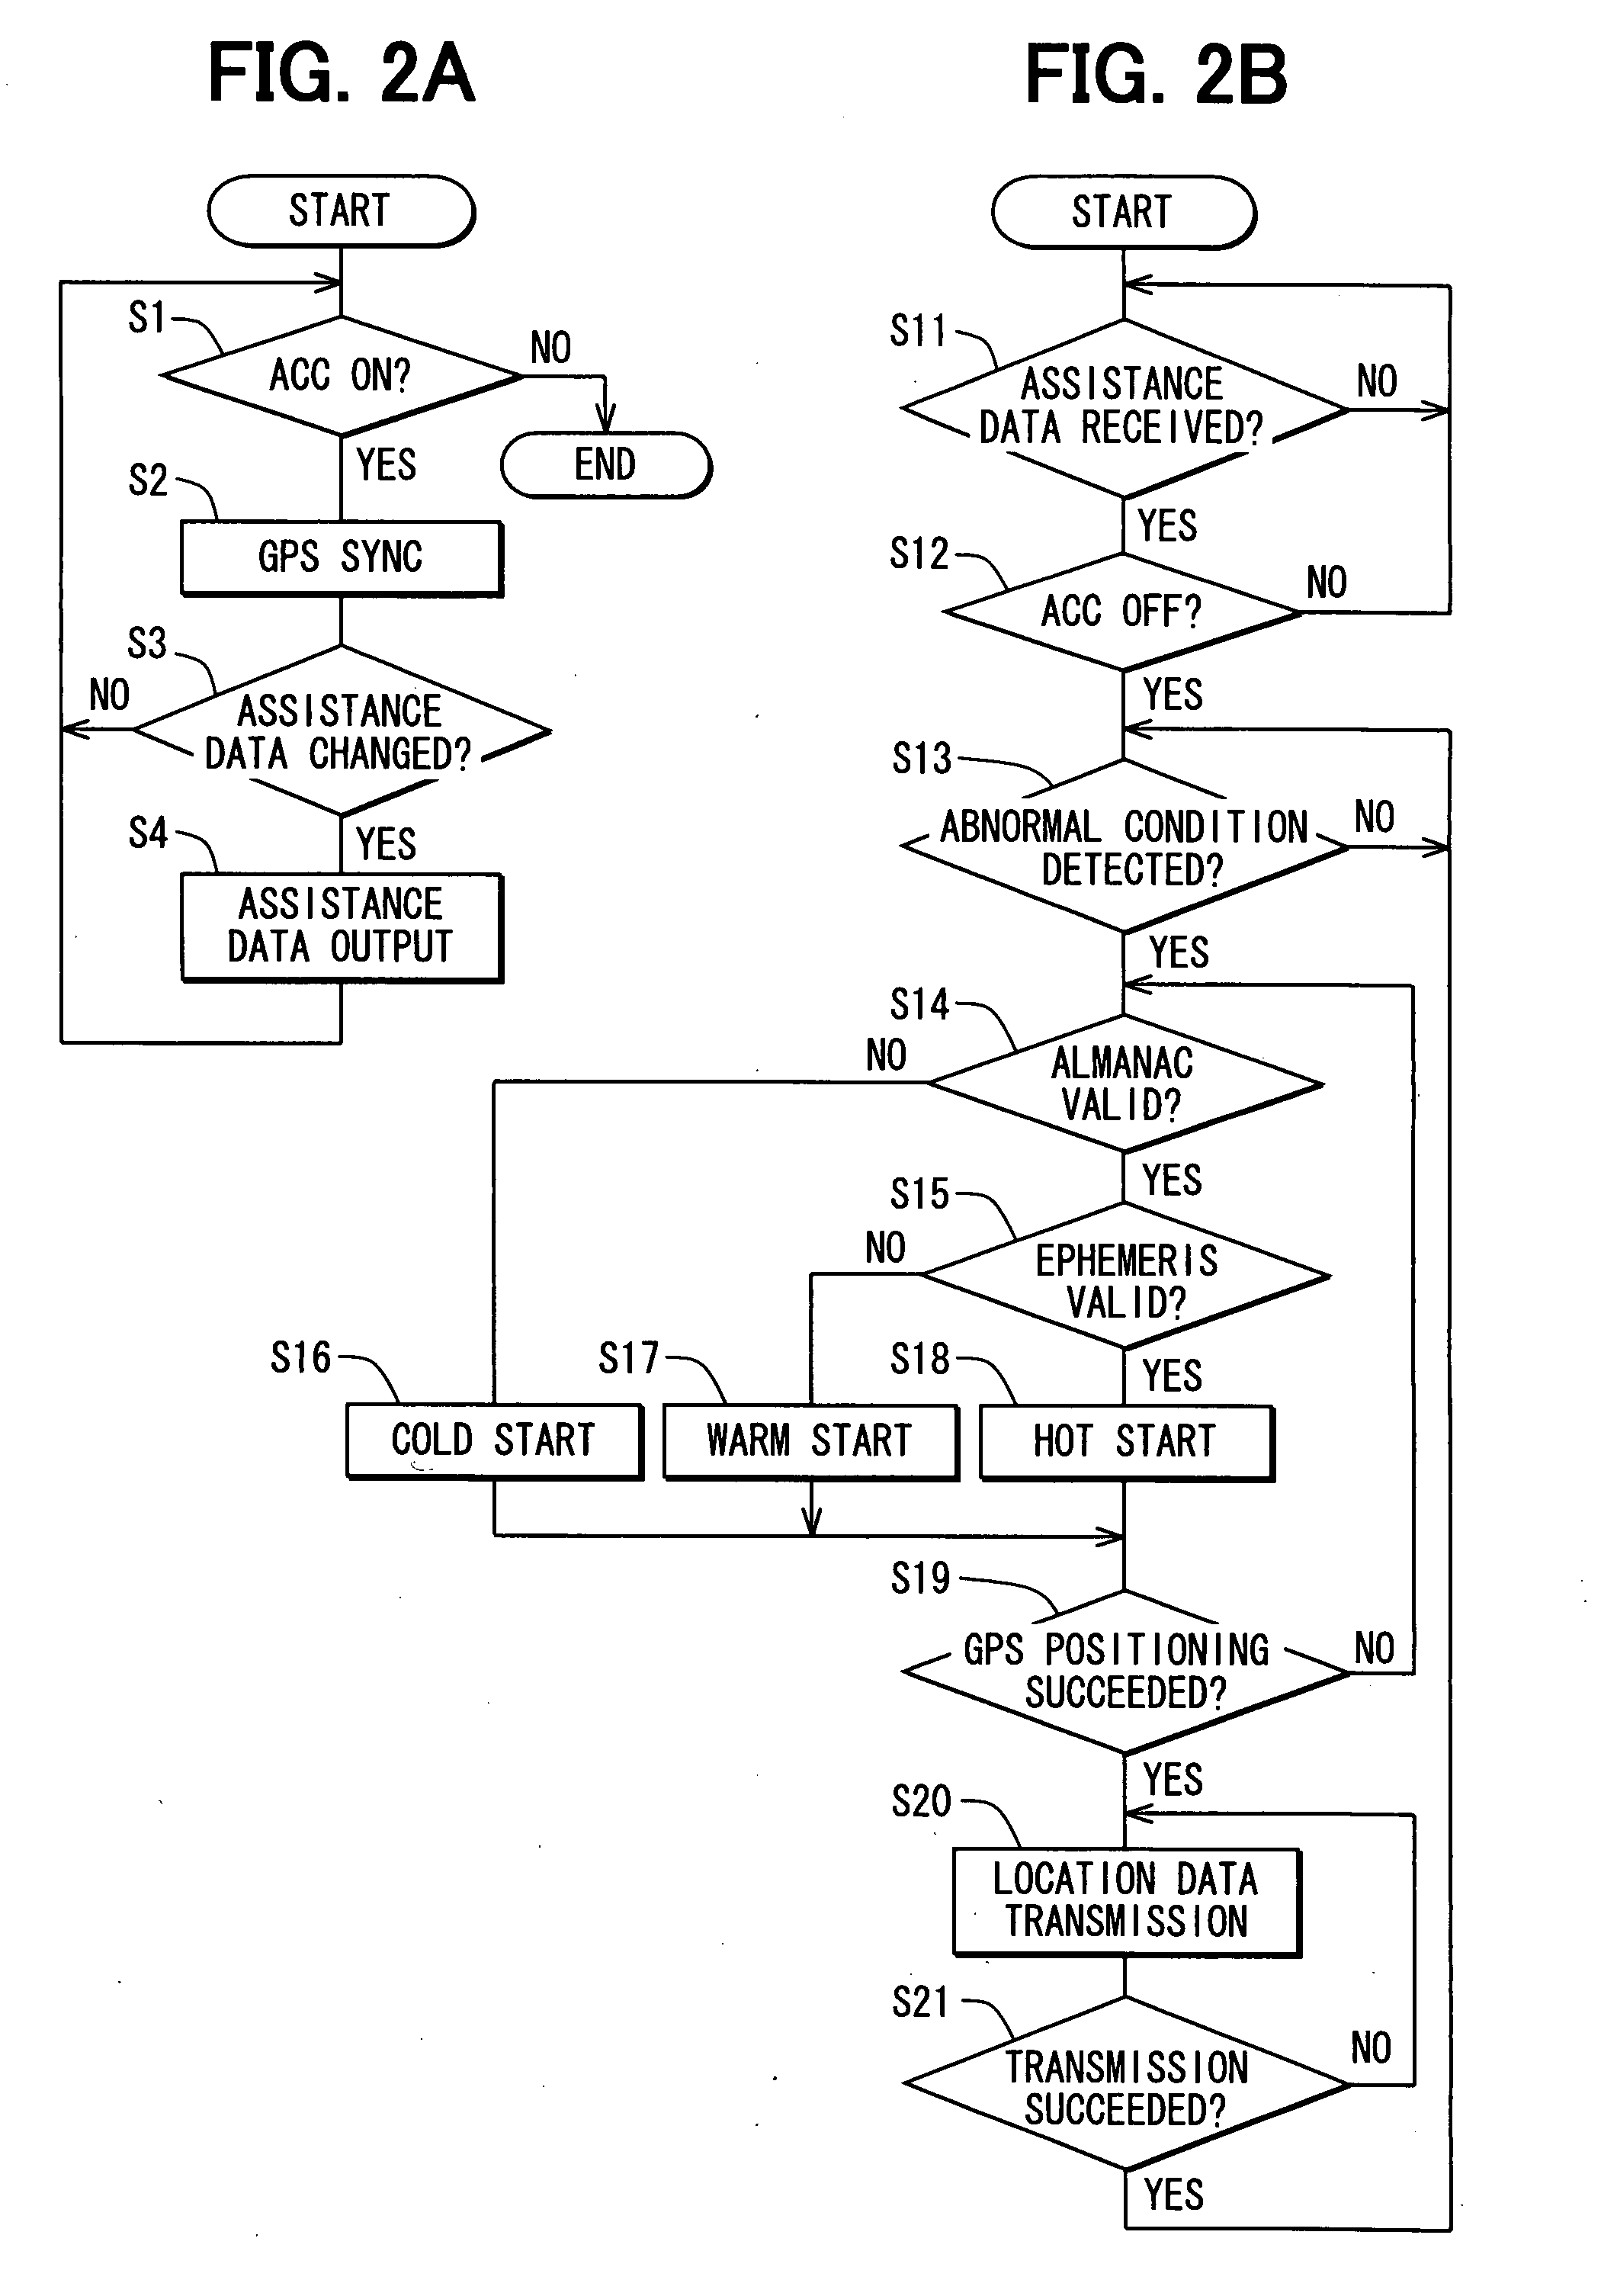 Wireless communication apparatus method and system for vehicle